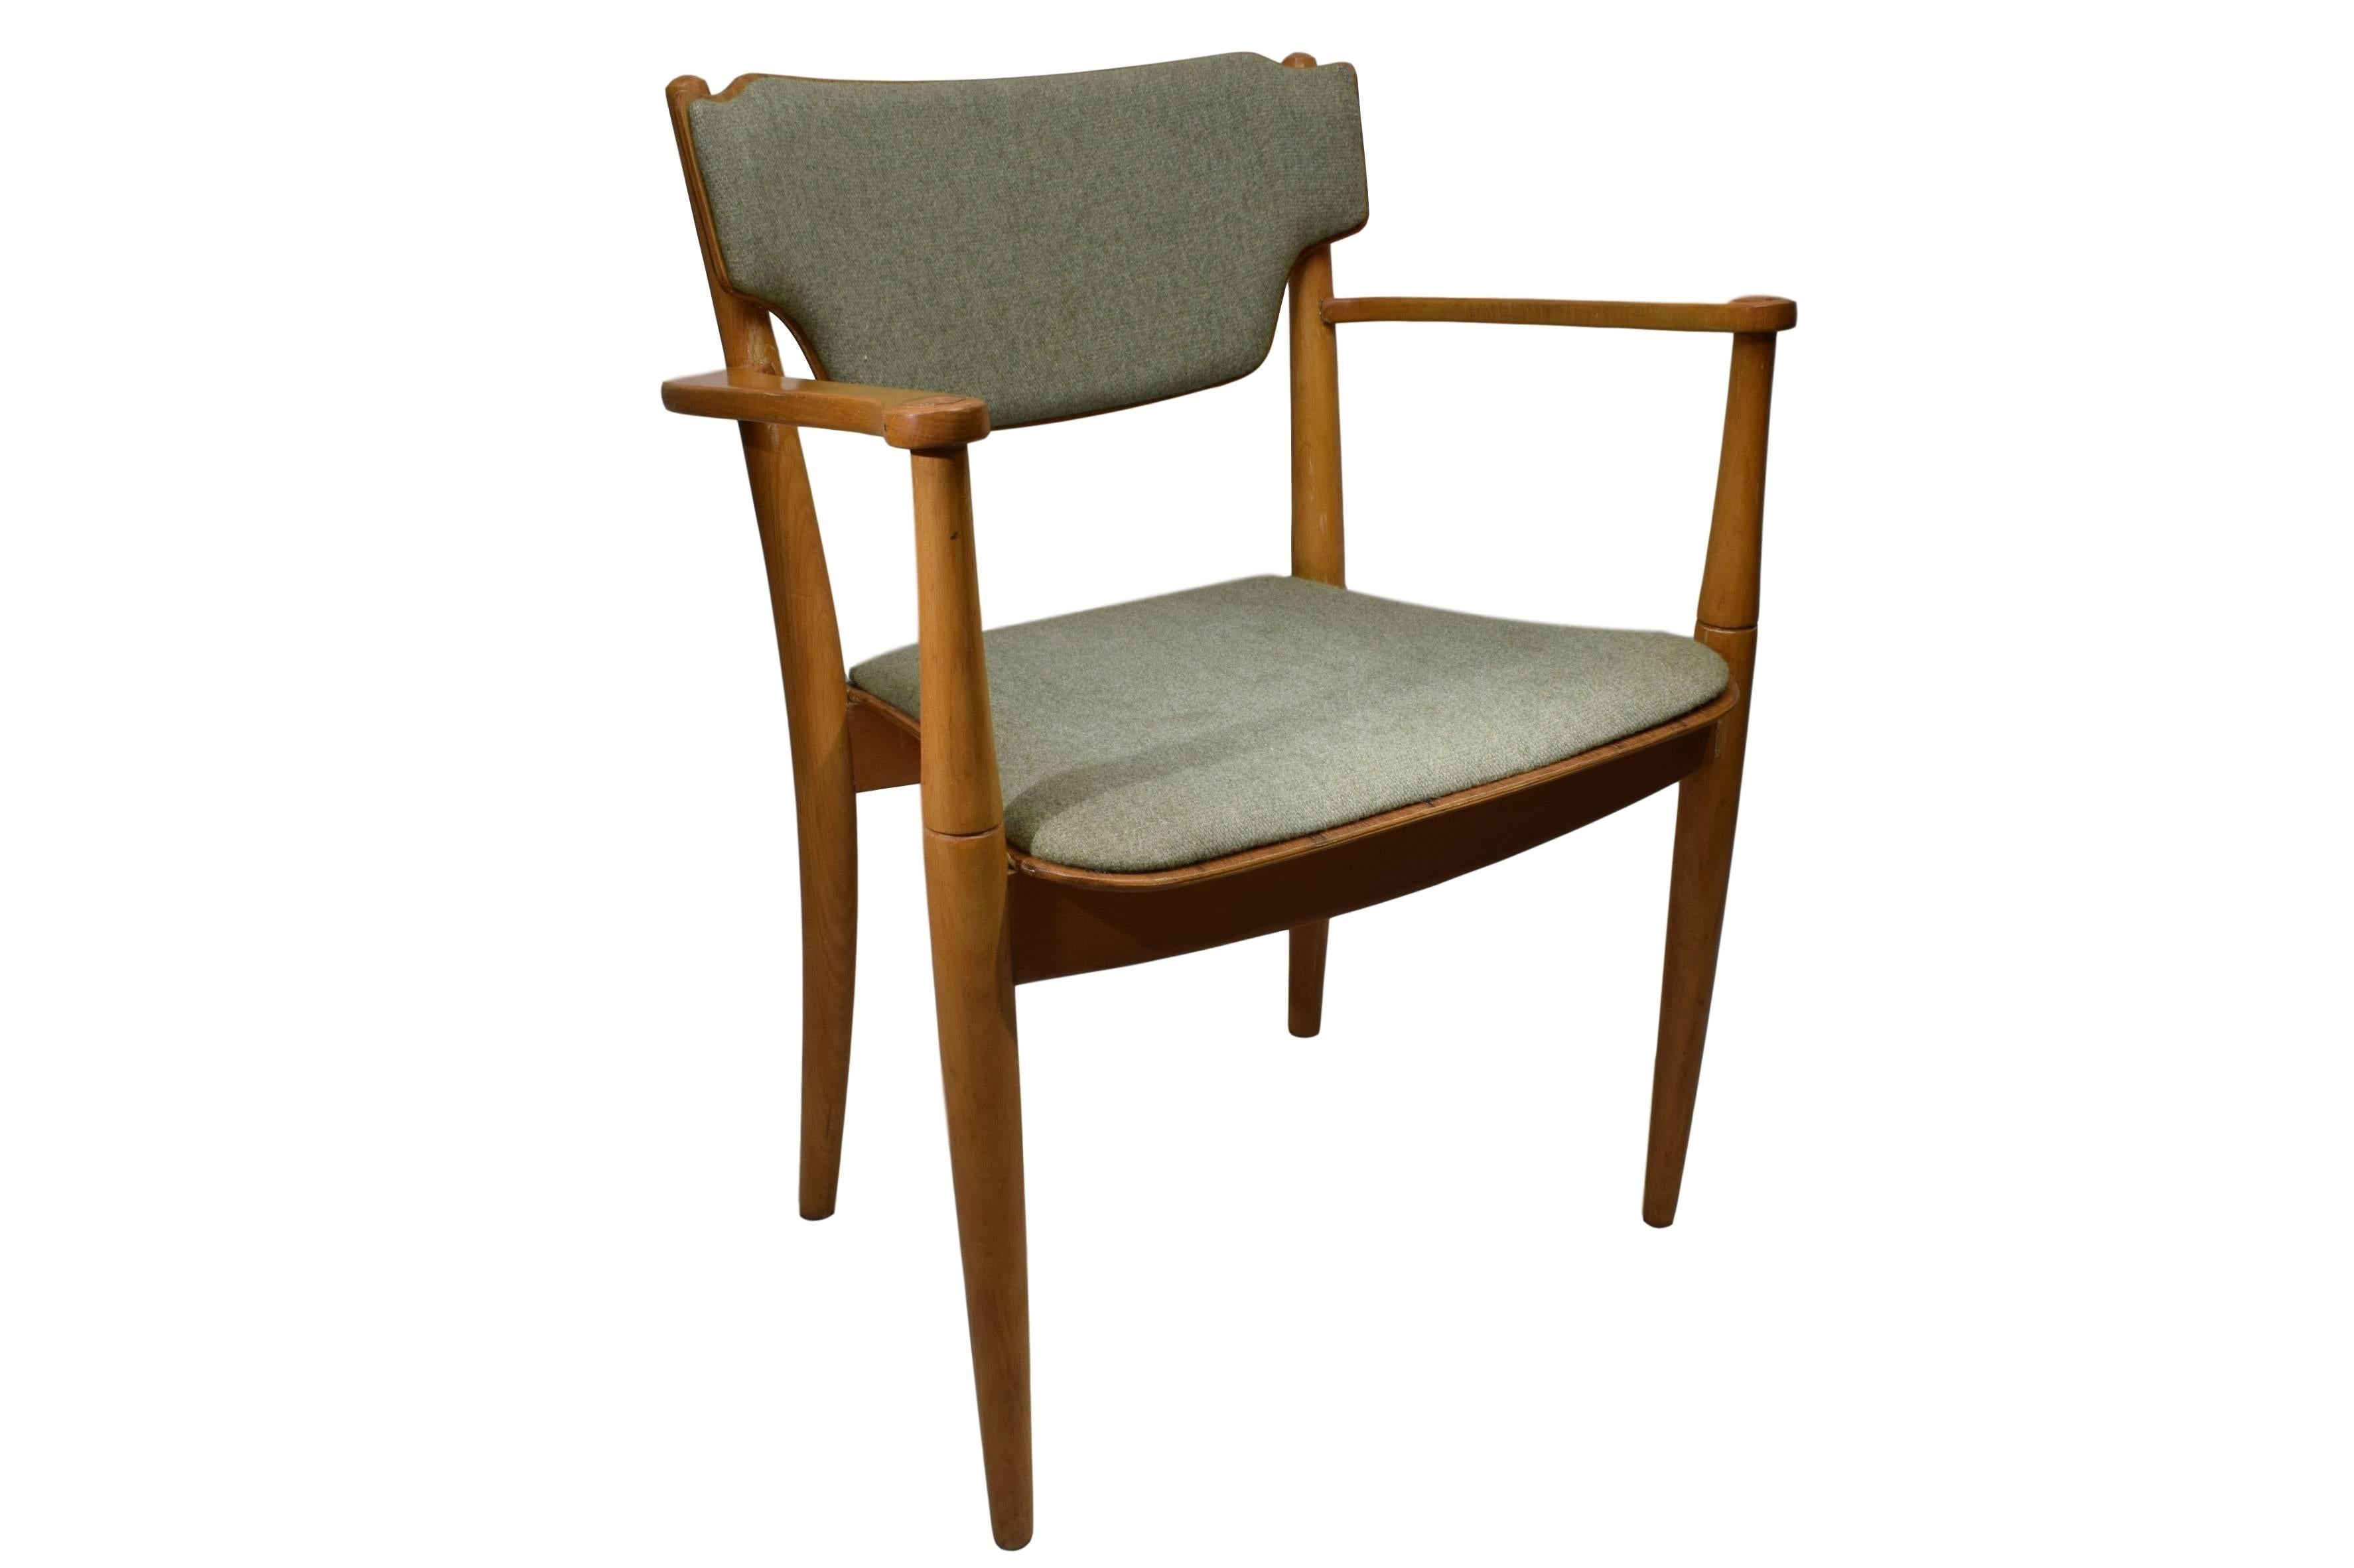 A Danish midcentury Portex armchair by Peter Hvidt (1916 - 1986) & Orla Mølgaard (1907-1993). Design from 1945. Produced by Fritz Hansen. The frame is made from beech and has a light-greenish woollen fabric upholstery. The rear legs are steam-bent.